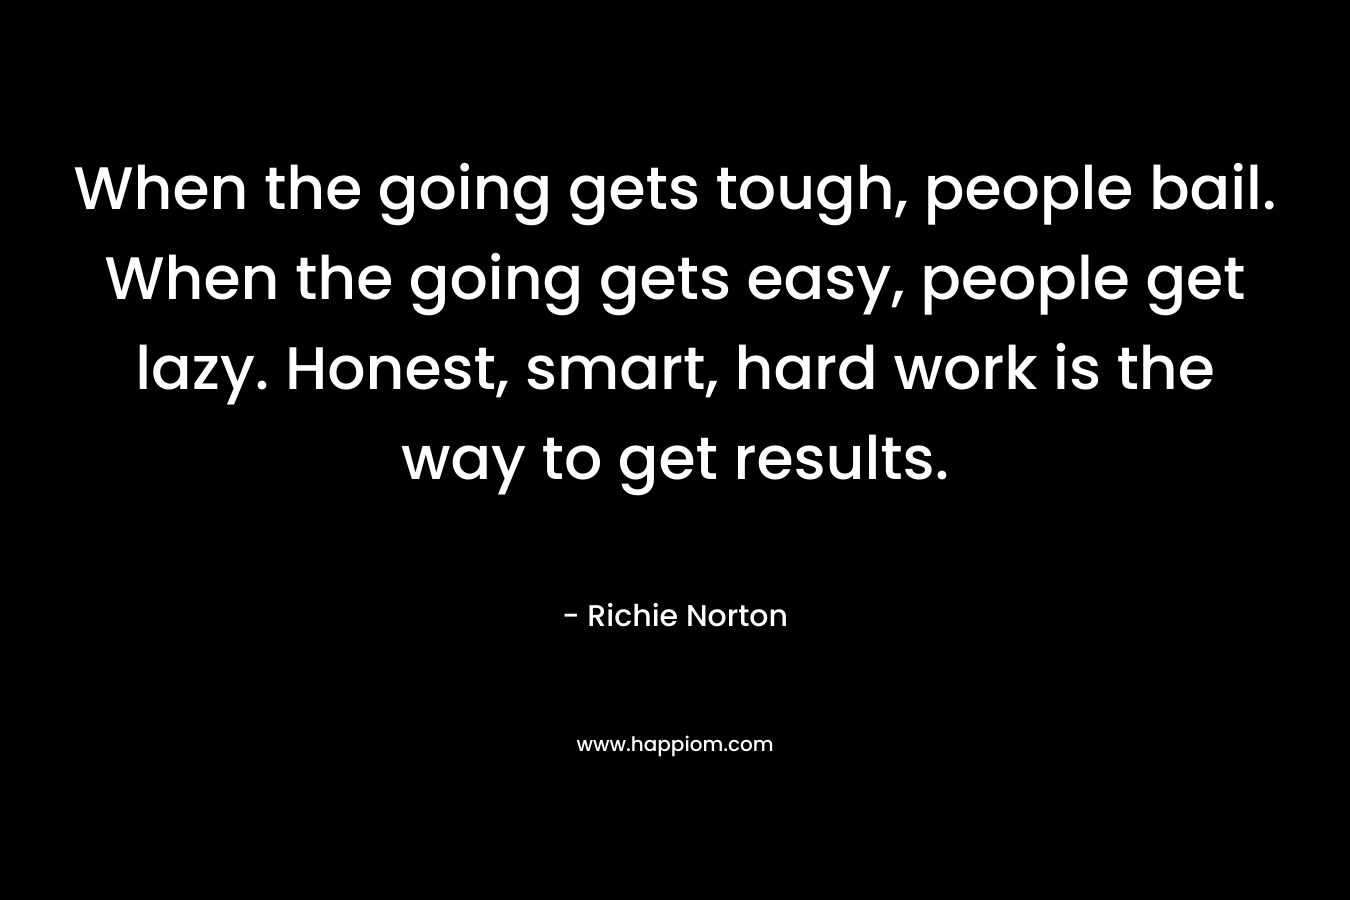 When the going gets tough, people bail. When the going gets easy, people get lazy. Honest, smart, hard work is the way to get results.